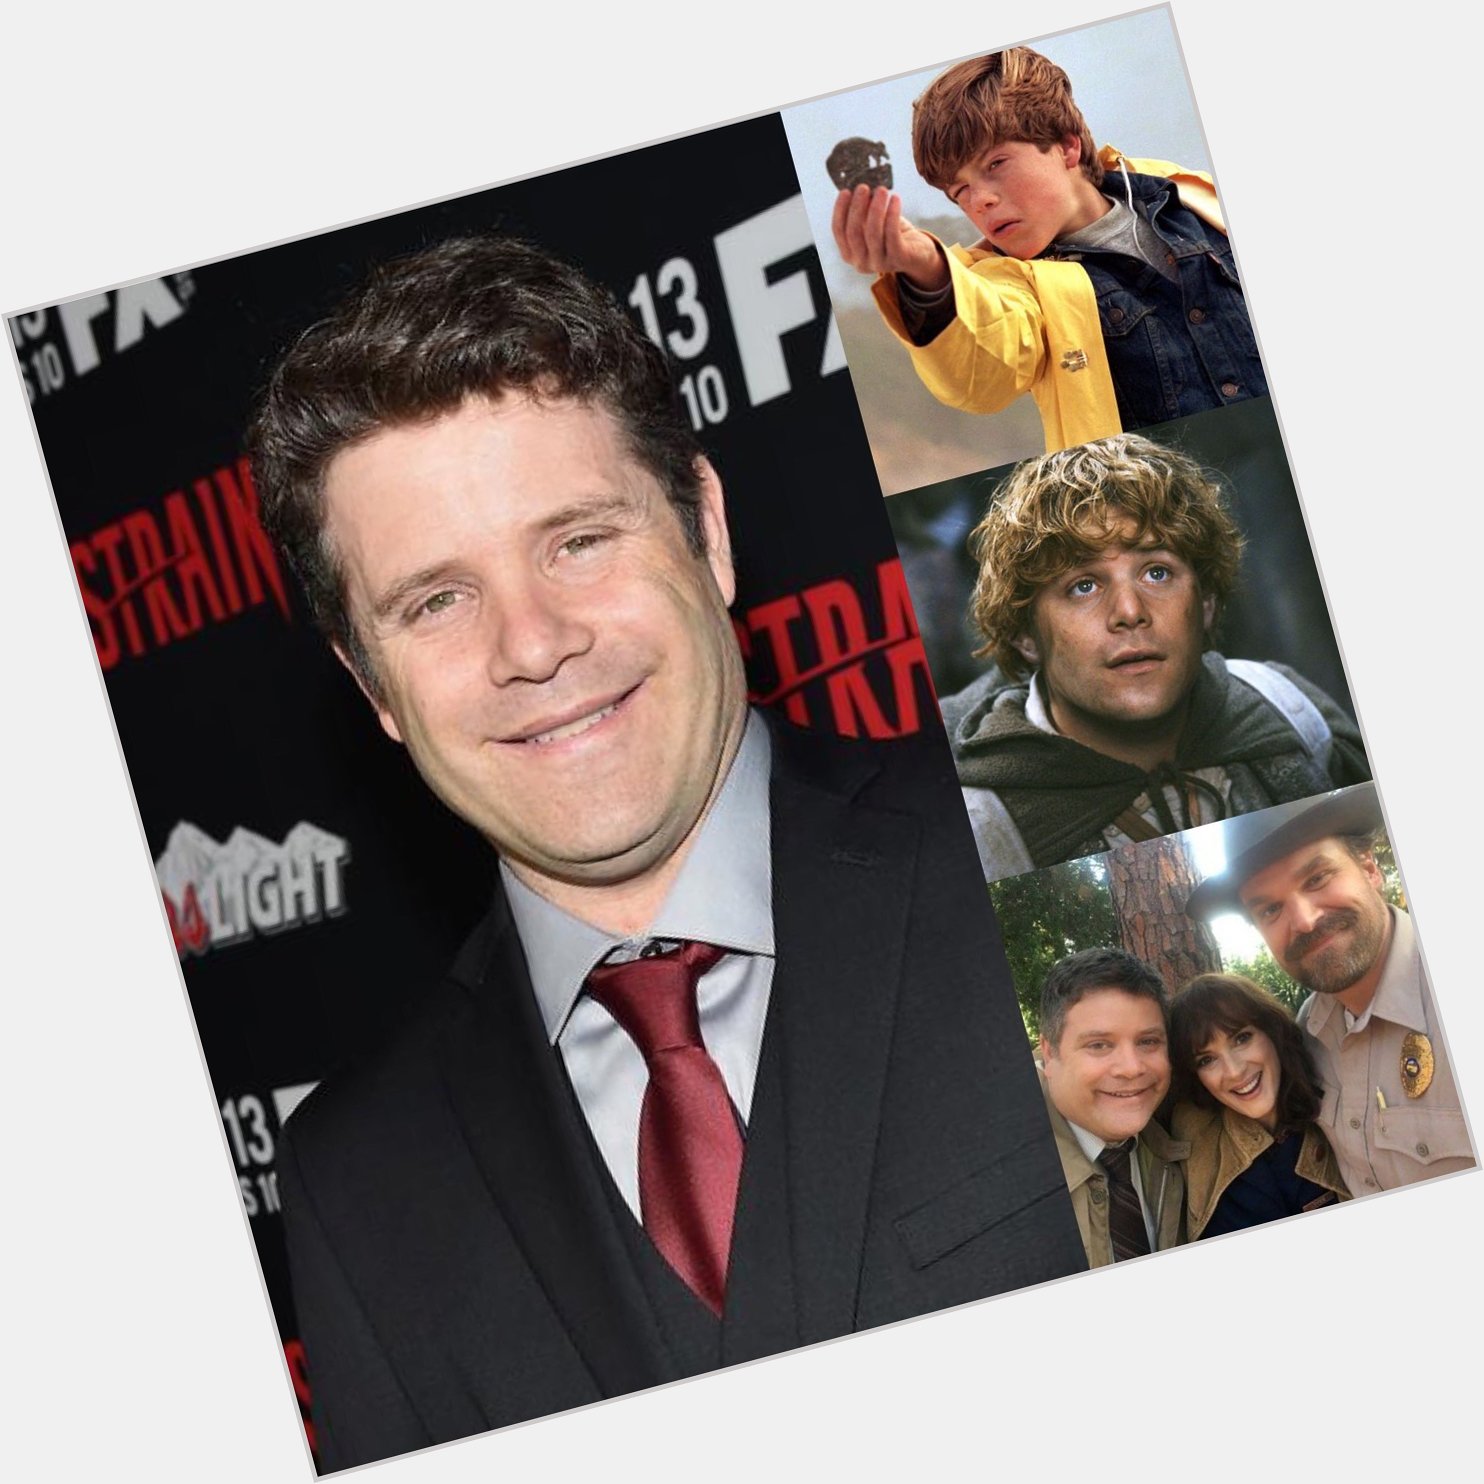 Happy birthday to American actor, voice actor, director, and producer Sean Astin, born February 25, 1971. 